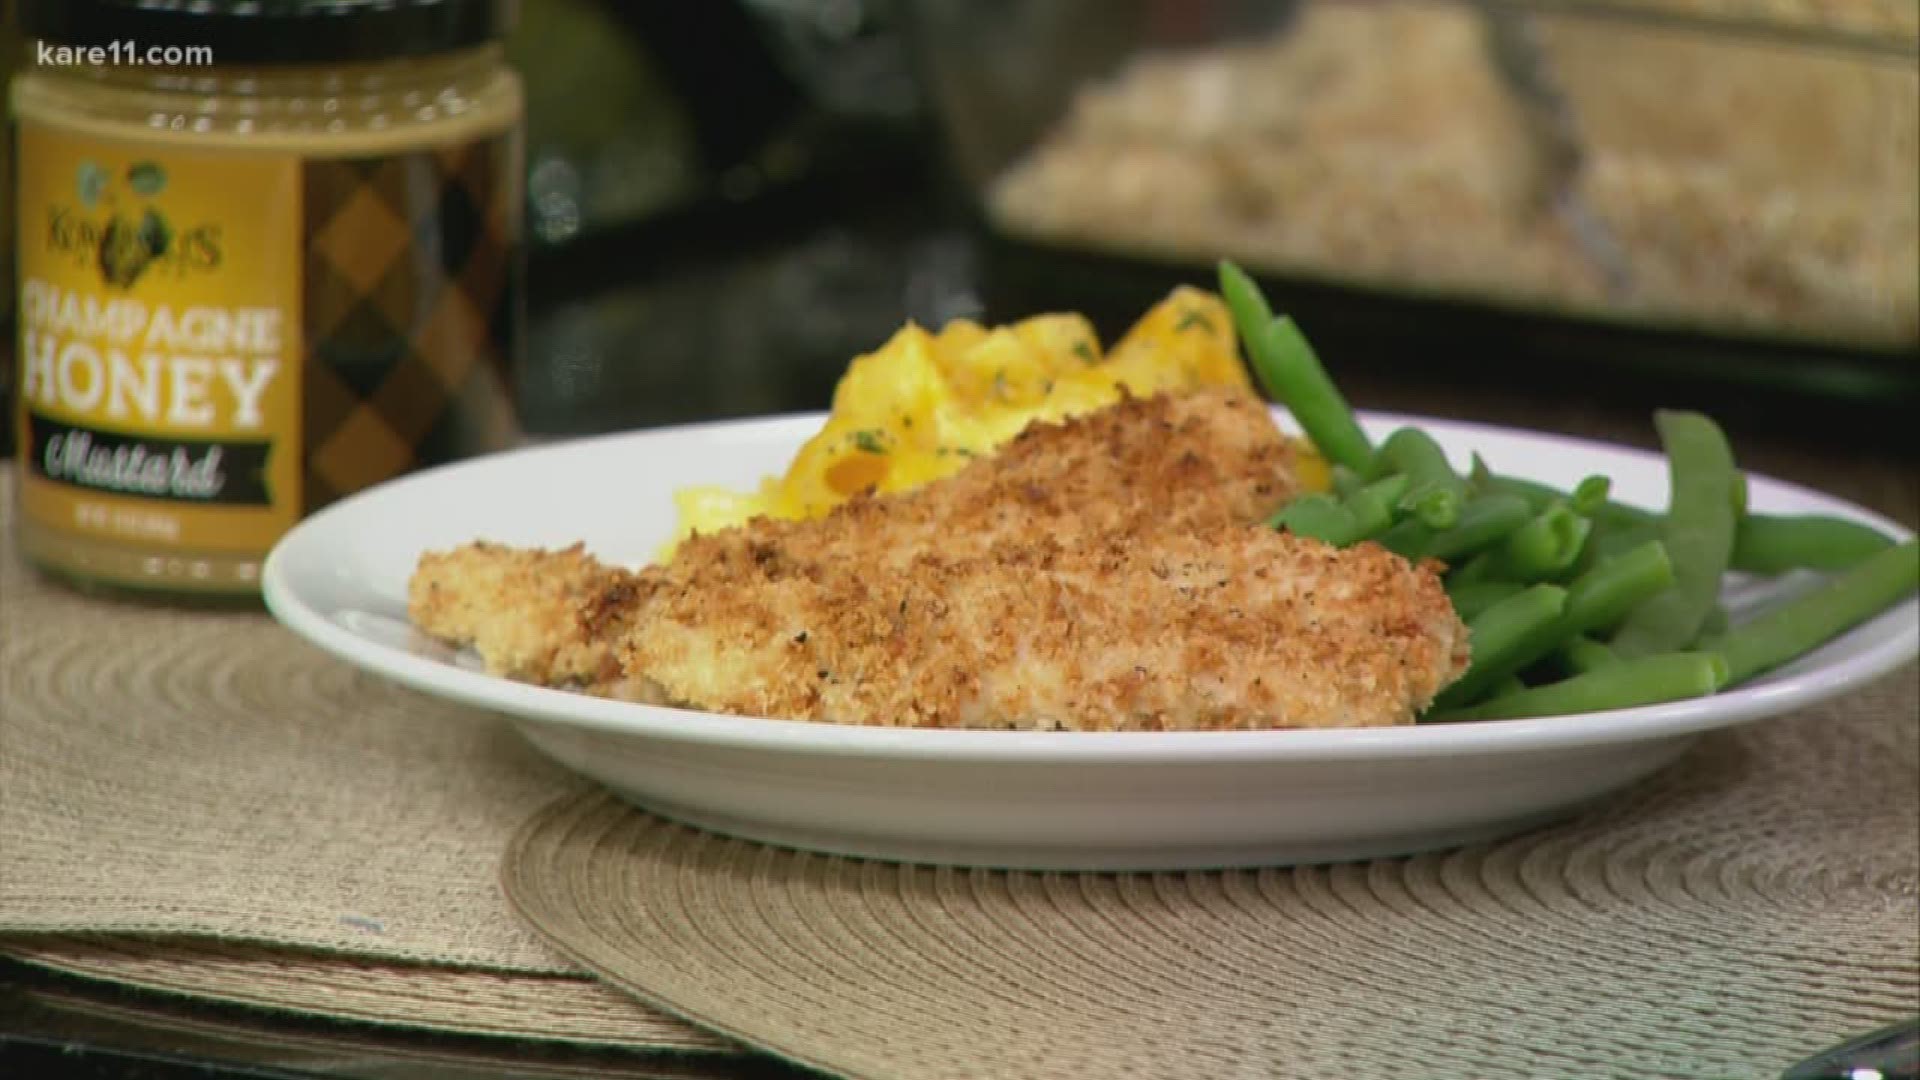 Kowalski's Rachael Perron shows how to make two weeknight meal solutions kids and kids at heart will love.